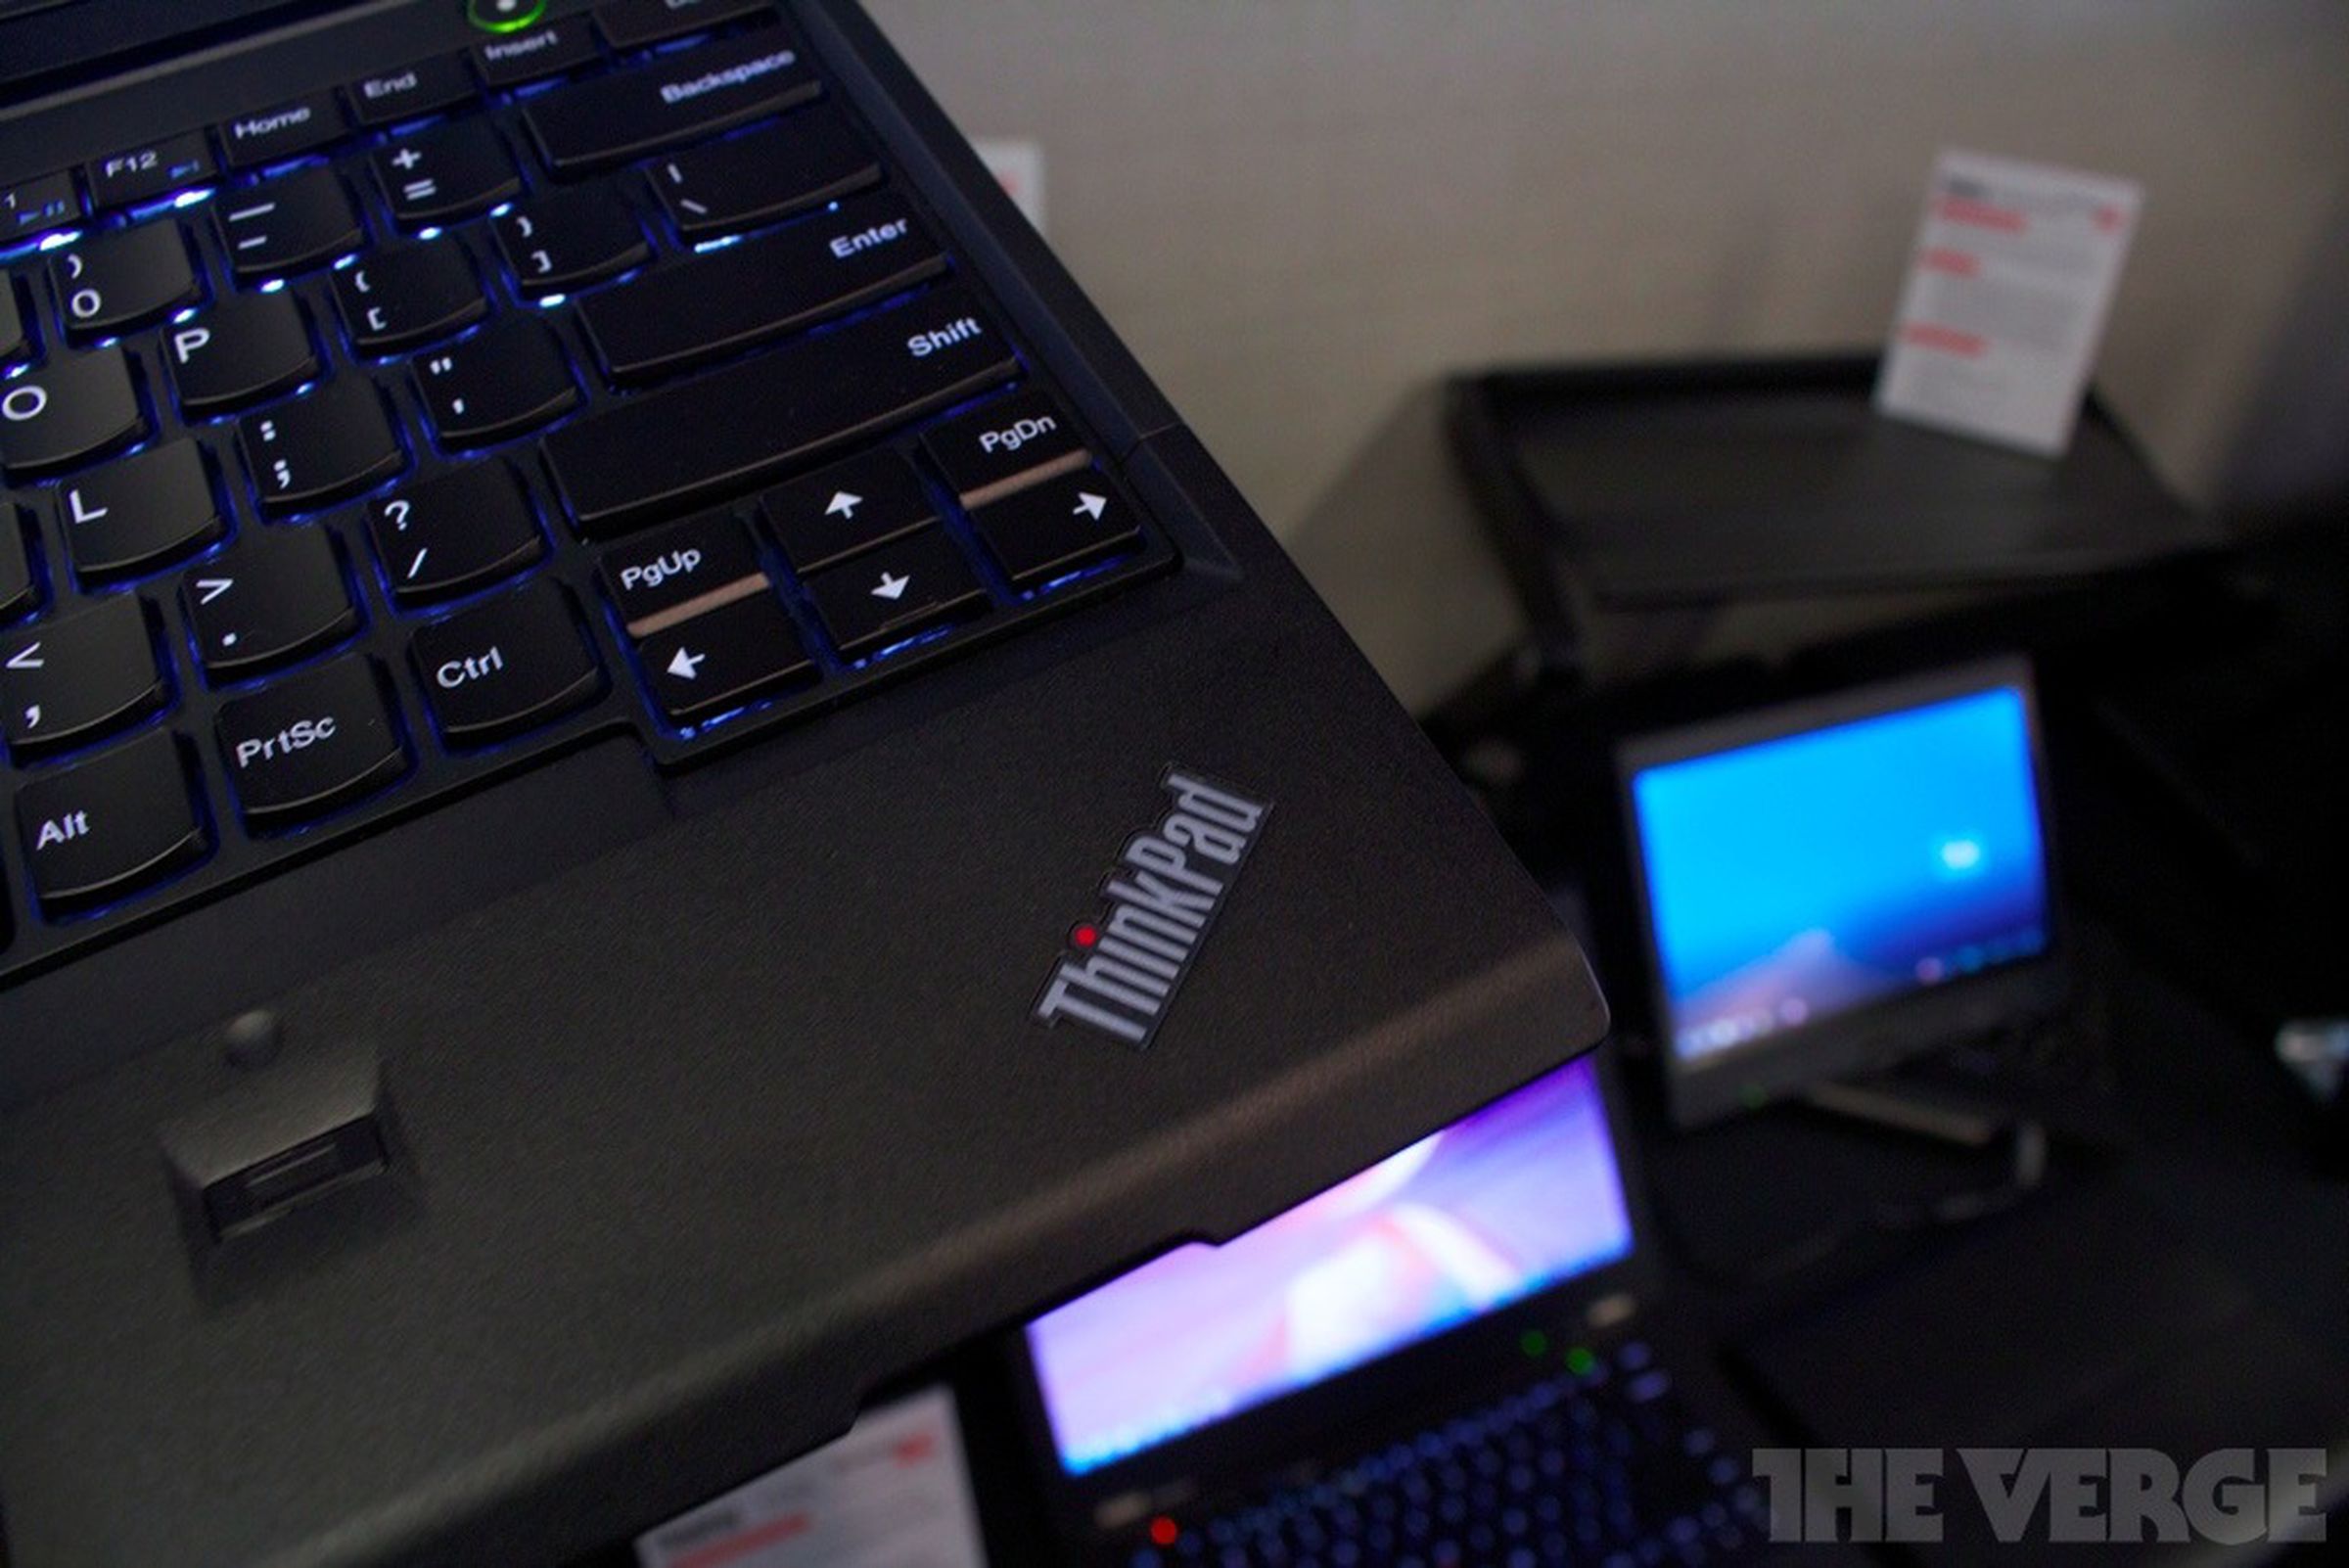 Lenovo's 2012 ThinkPad line: X230/X230T, T430/T430s, W430/W530, L430/L530 hands-on pictures